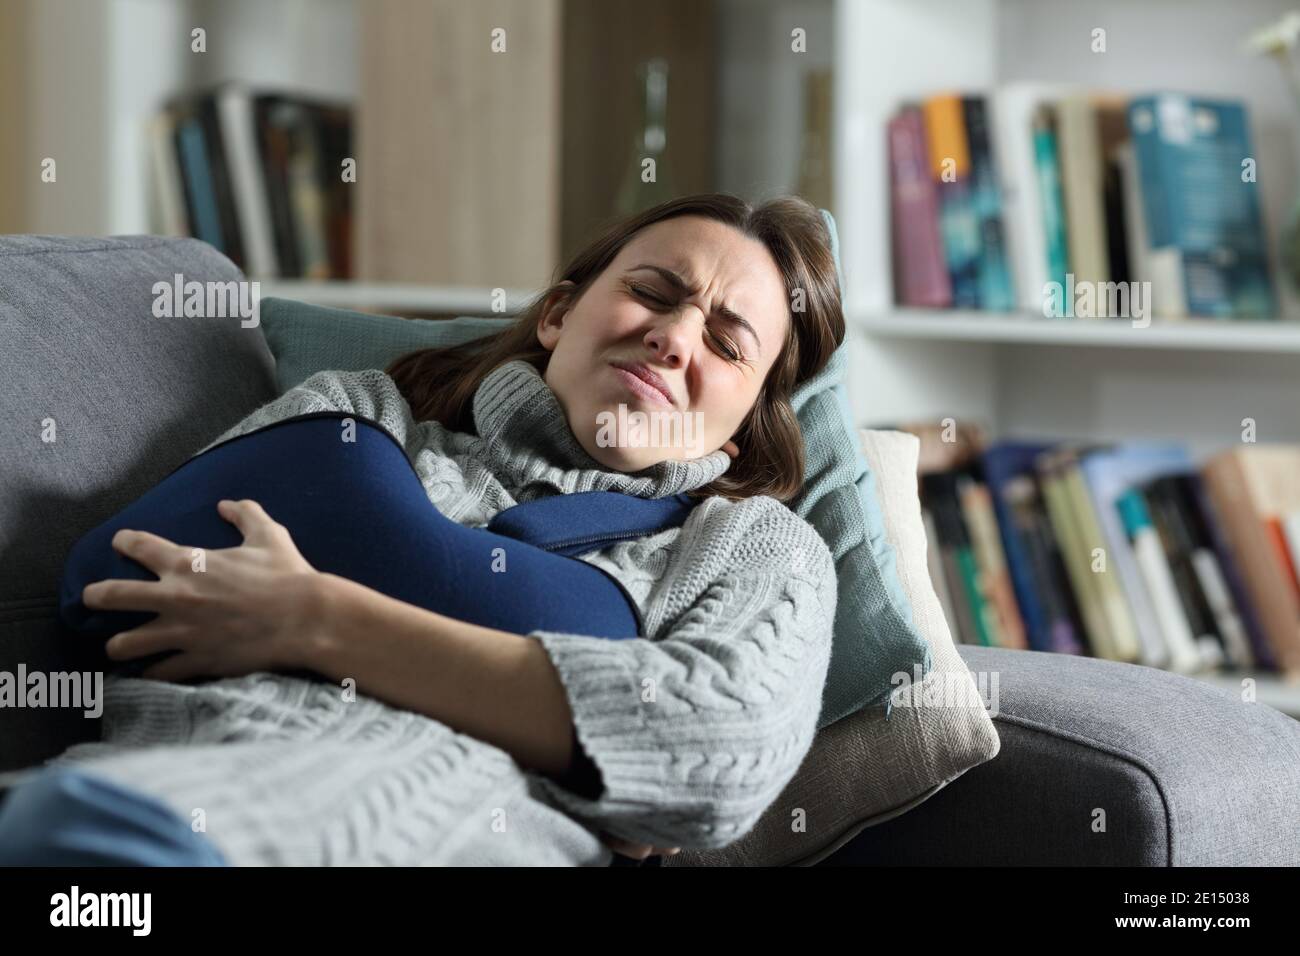 Woman suffering ache with broken arm in a sling lying on a couch at home Stock Photo